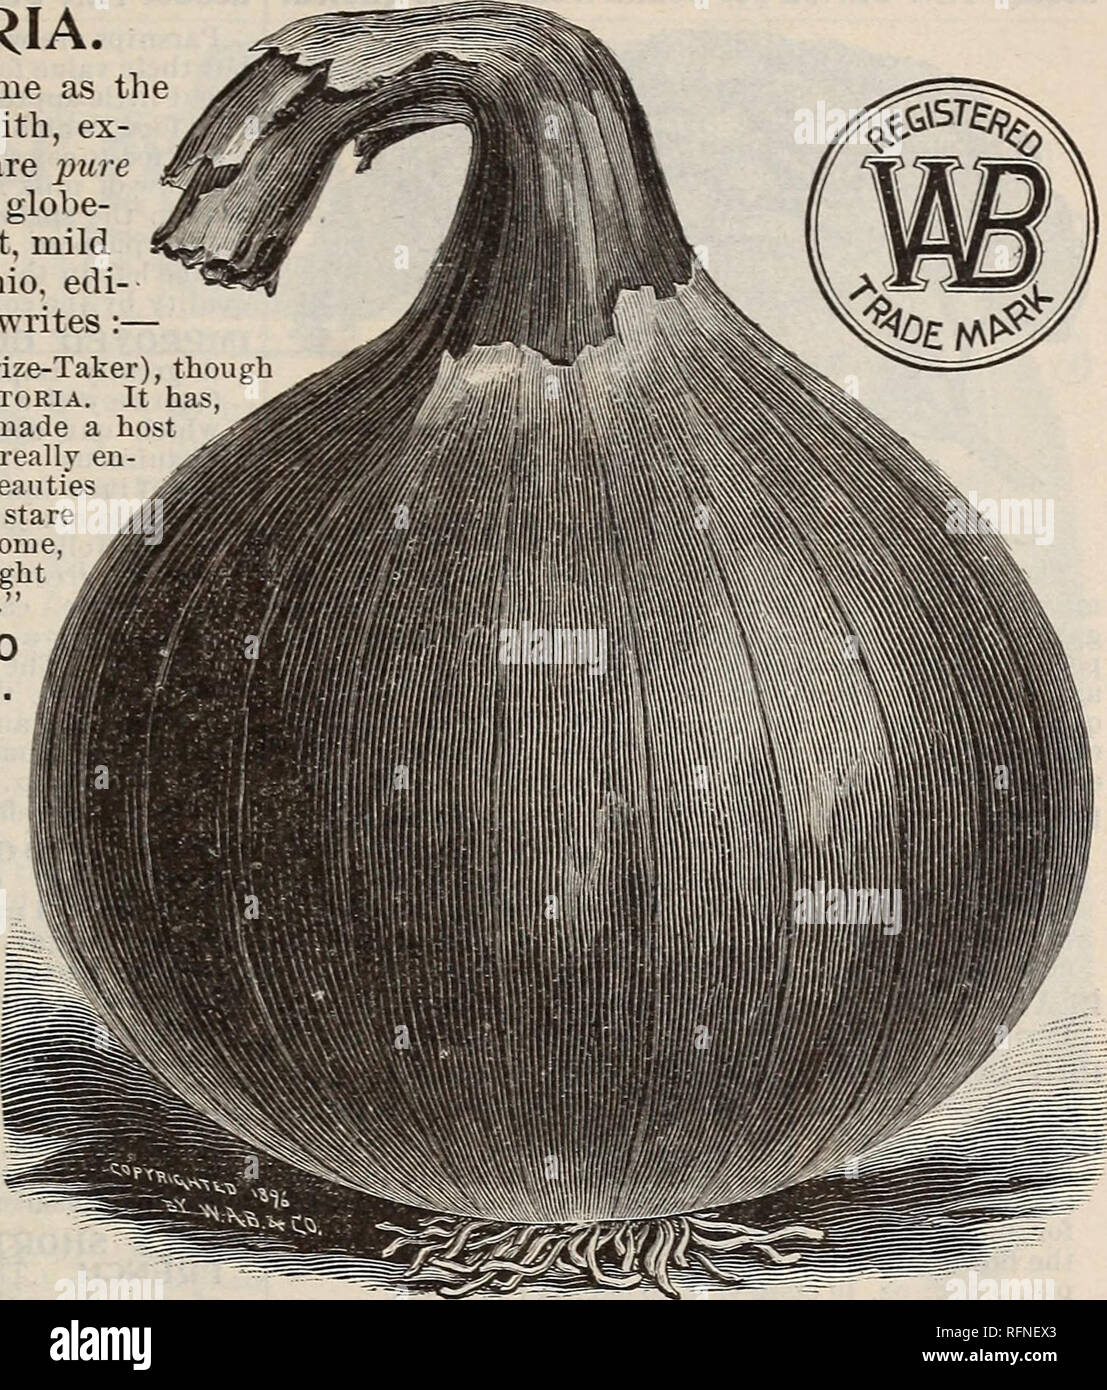 . Burpee's farm annual written at Fordhook Farm. Nurseries (Horticulture) Pennsylvania Philadelphia Catalogs; Vegetables Seeds Catalogs; Plants, Ornamental Catalogs; Flowers Seeds Catalogs. New Mammoth VICTORIA ONIONS. This new race of Onions, from the island of Sardinia, was introduced by us eight years ago. We offer American-Grown Seed, which is far superior to the Italian-grown generally sold. WHITE VICTORIA. This is identically the same as the Bed Victoria, illustrated herewith, ex- cept that both skin and flesh are pure ichite. It is a very handsome globe- shaped onion, solid, and of swee Stock Photo